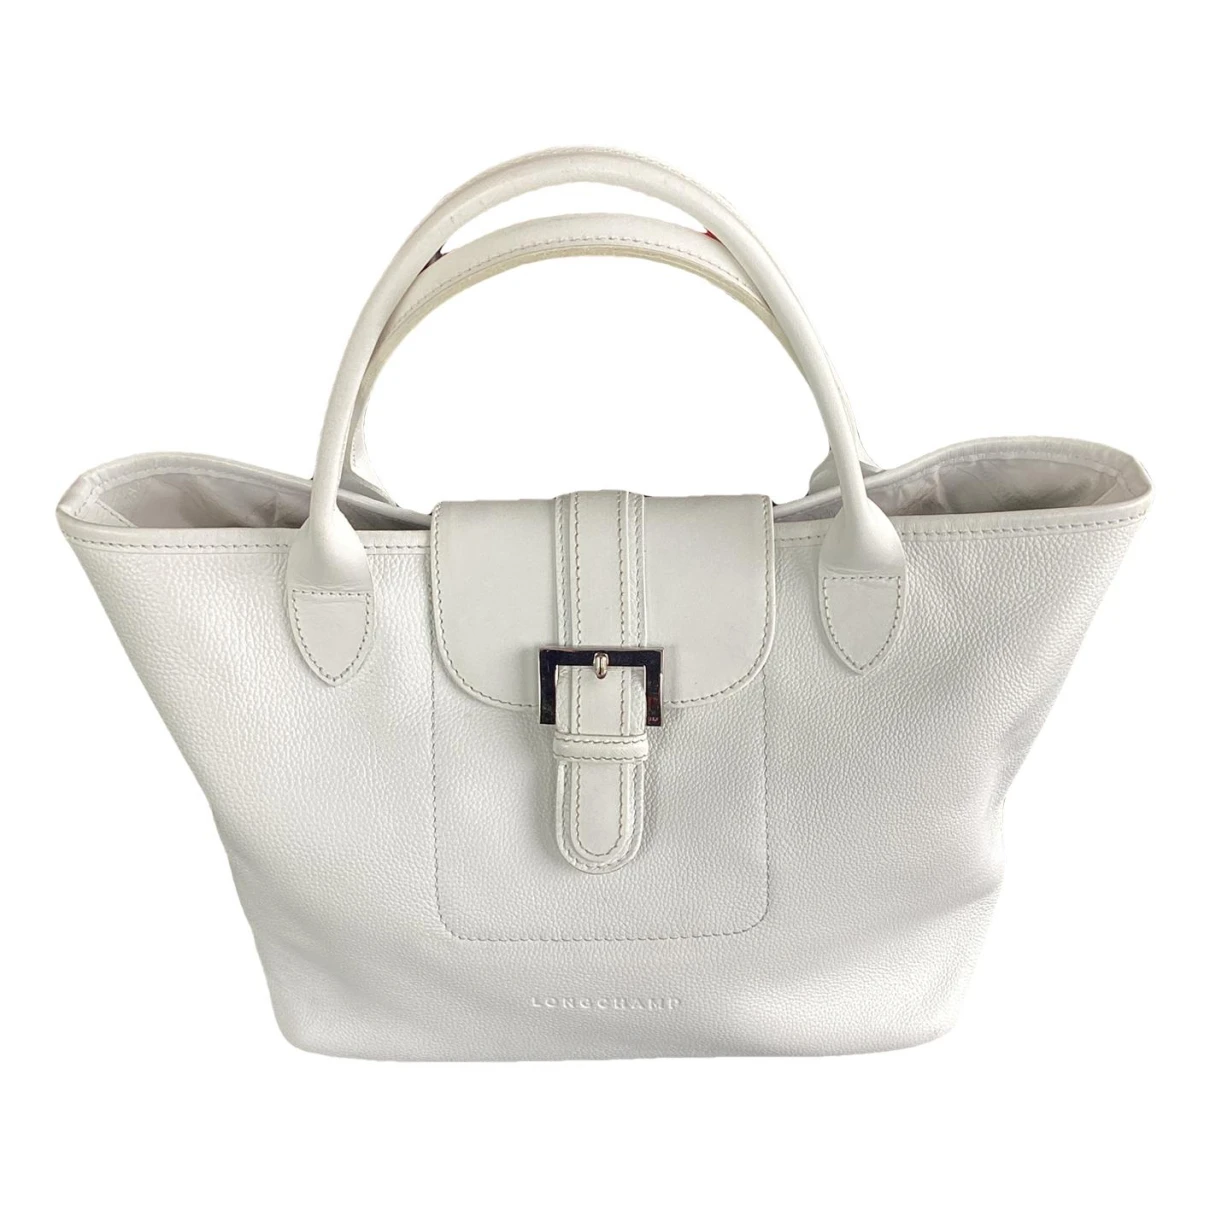 Pre-owned Longchamp Pliage Leather Handbag In White